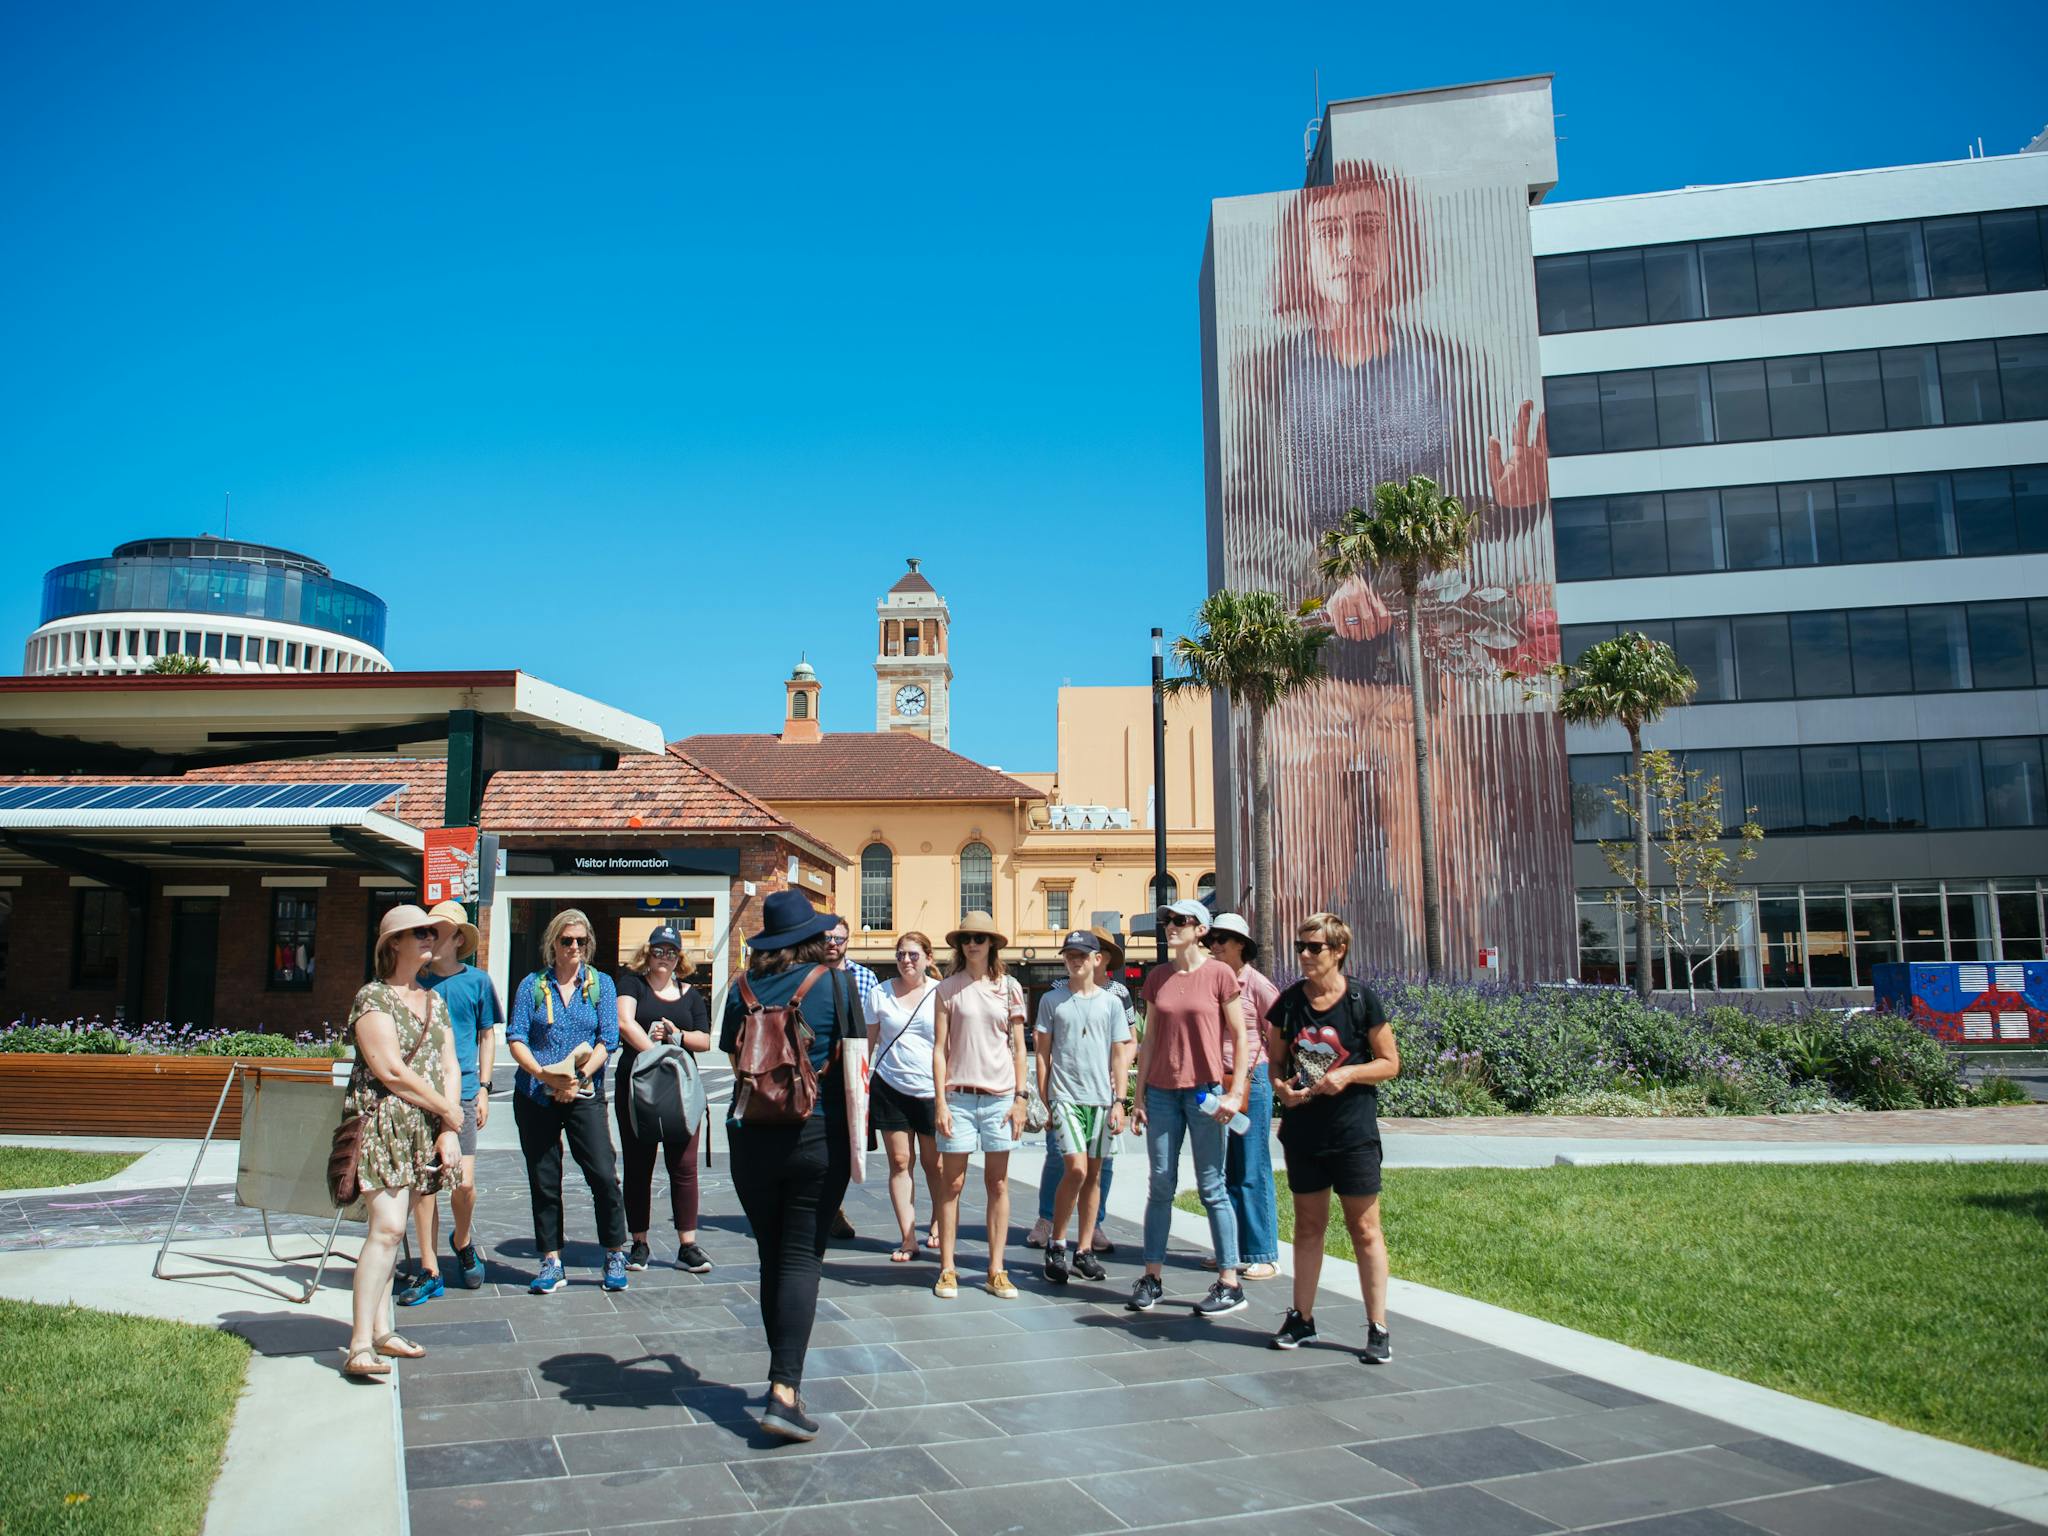 A group of people listen to a tour guide, standing in front of a large mural by Fintan Magee